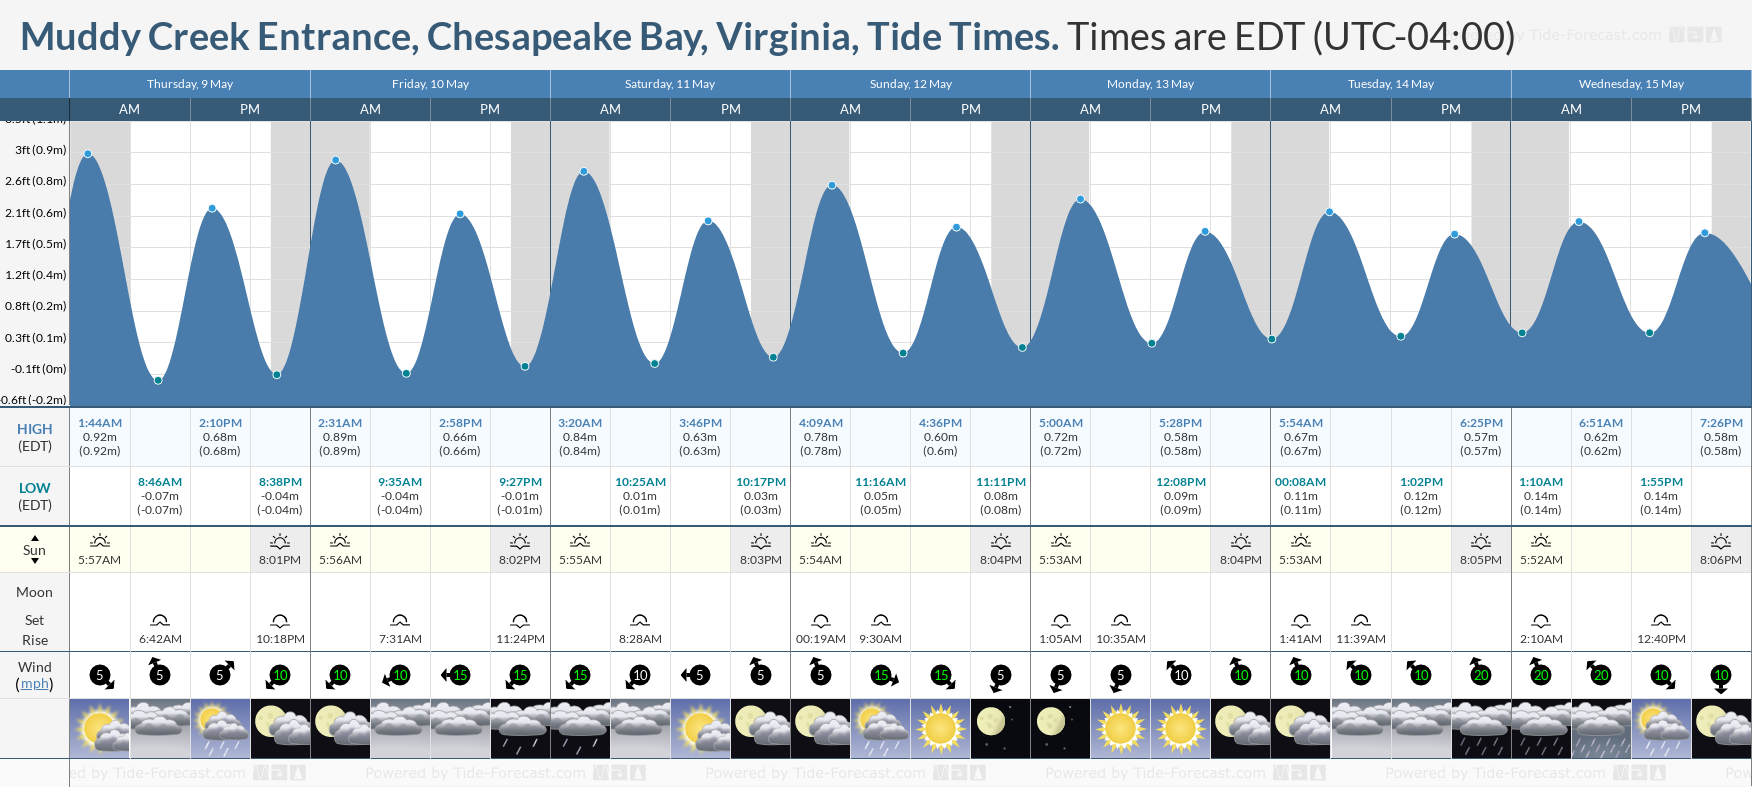 Muddy Creek Entrance, Chesapeake Bay, Virginia Tide Chart including high and low tide tide times for the next 7 days